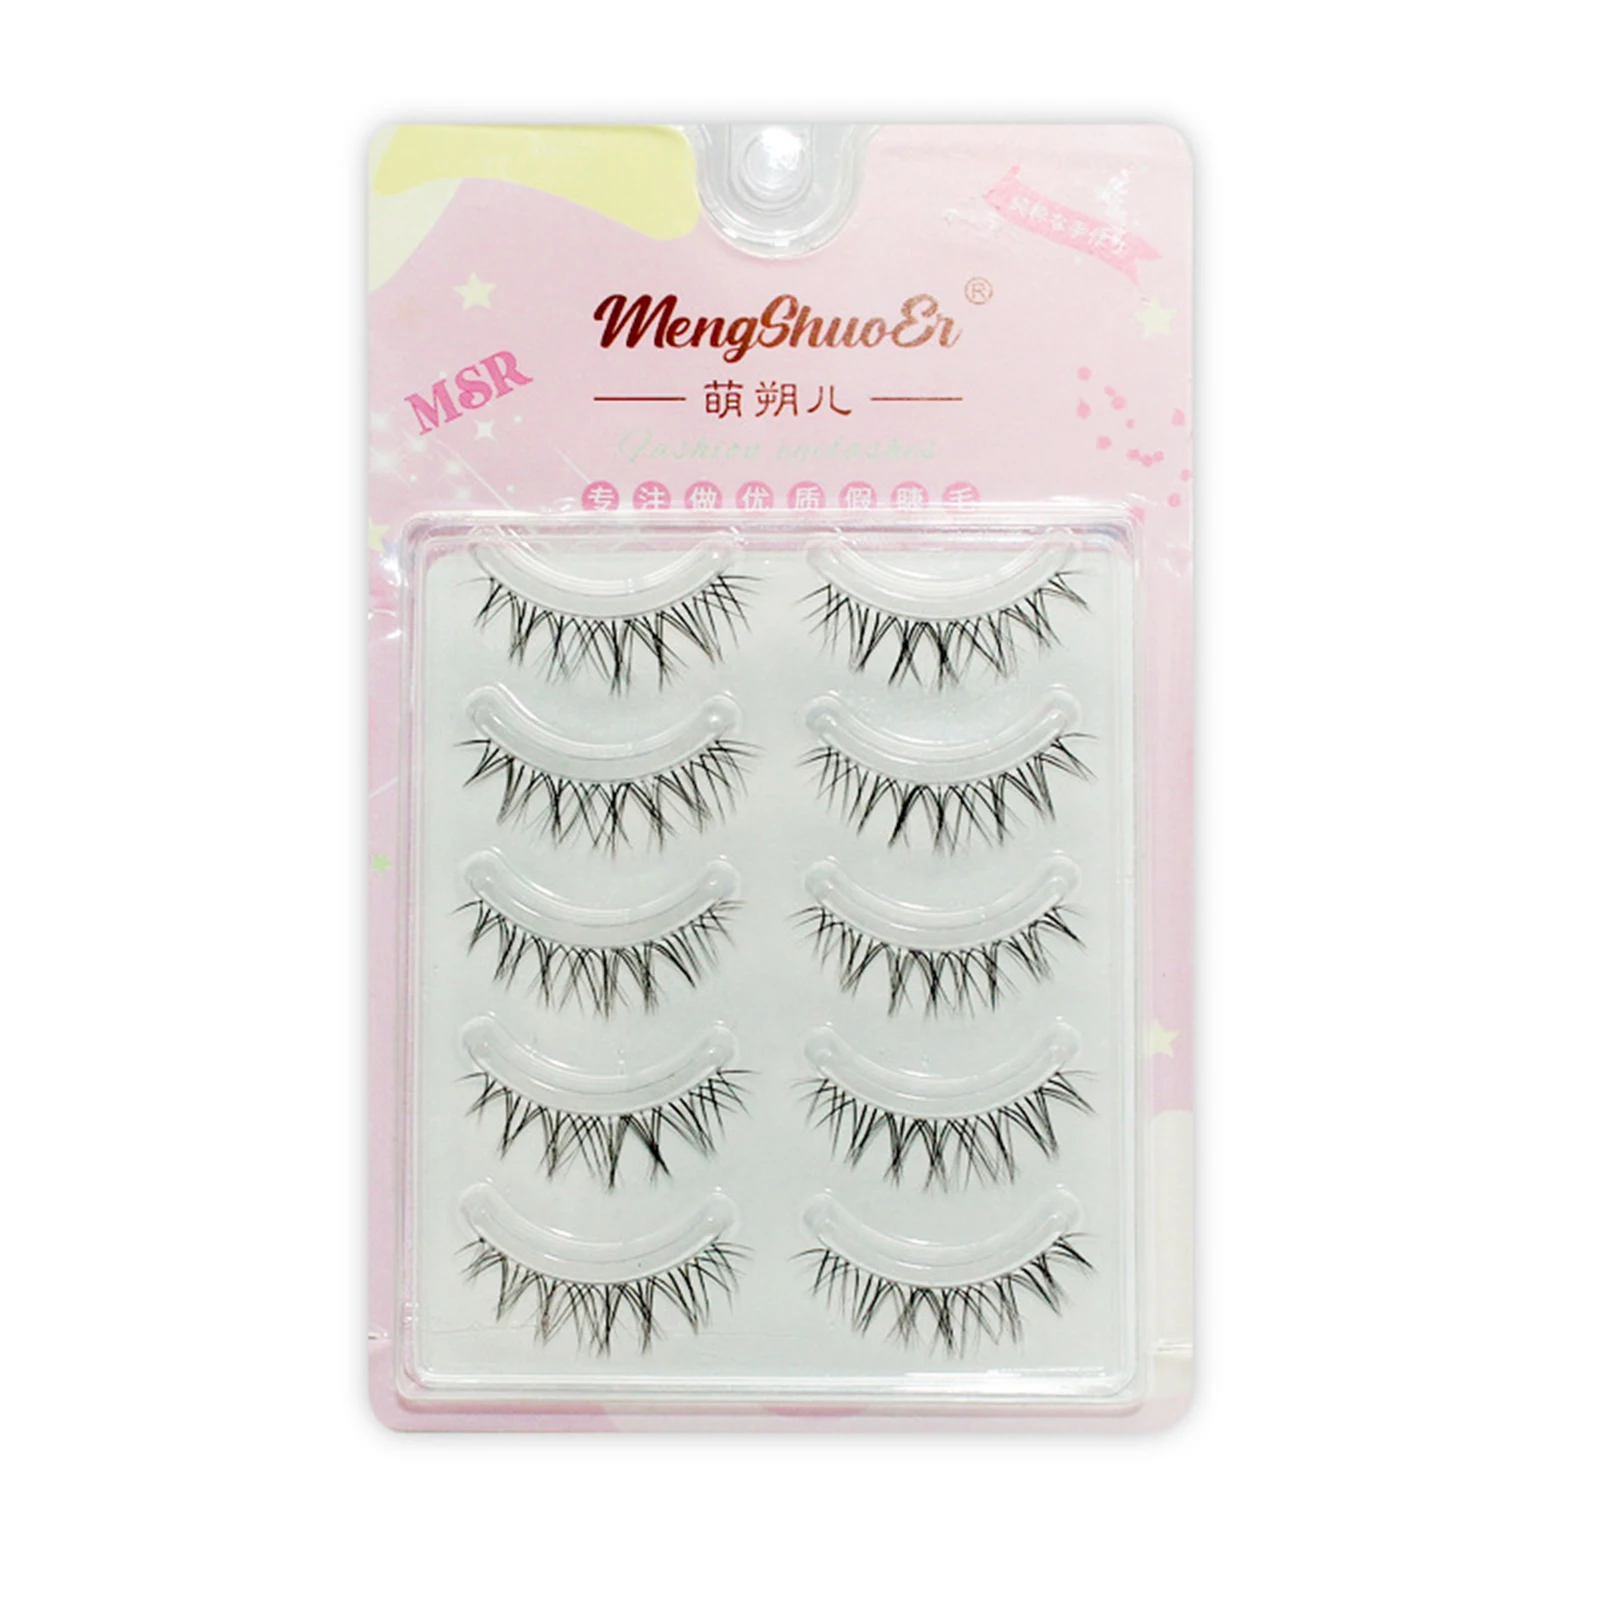 

5 Pairs Realistic Looking Eyelashes Lightweight Slender Fluffy Soft Lashes for Party Cosplay Performance Makeup MH88